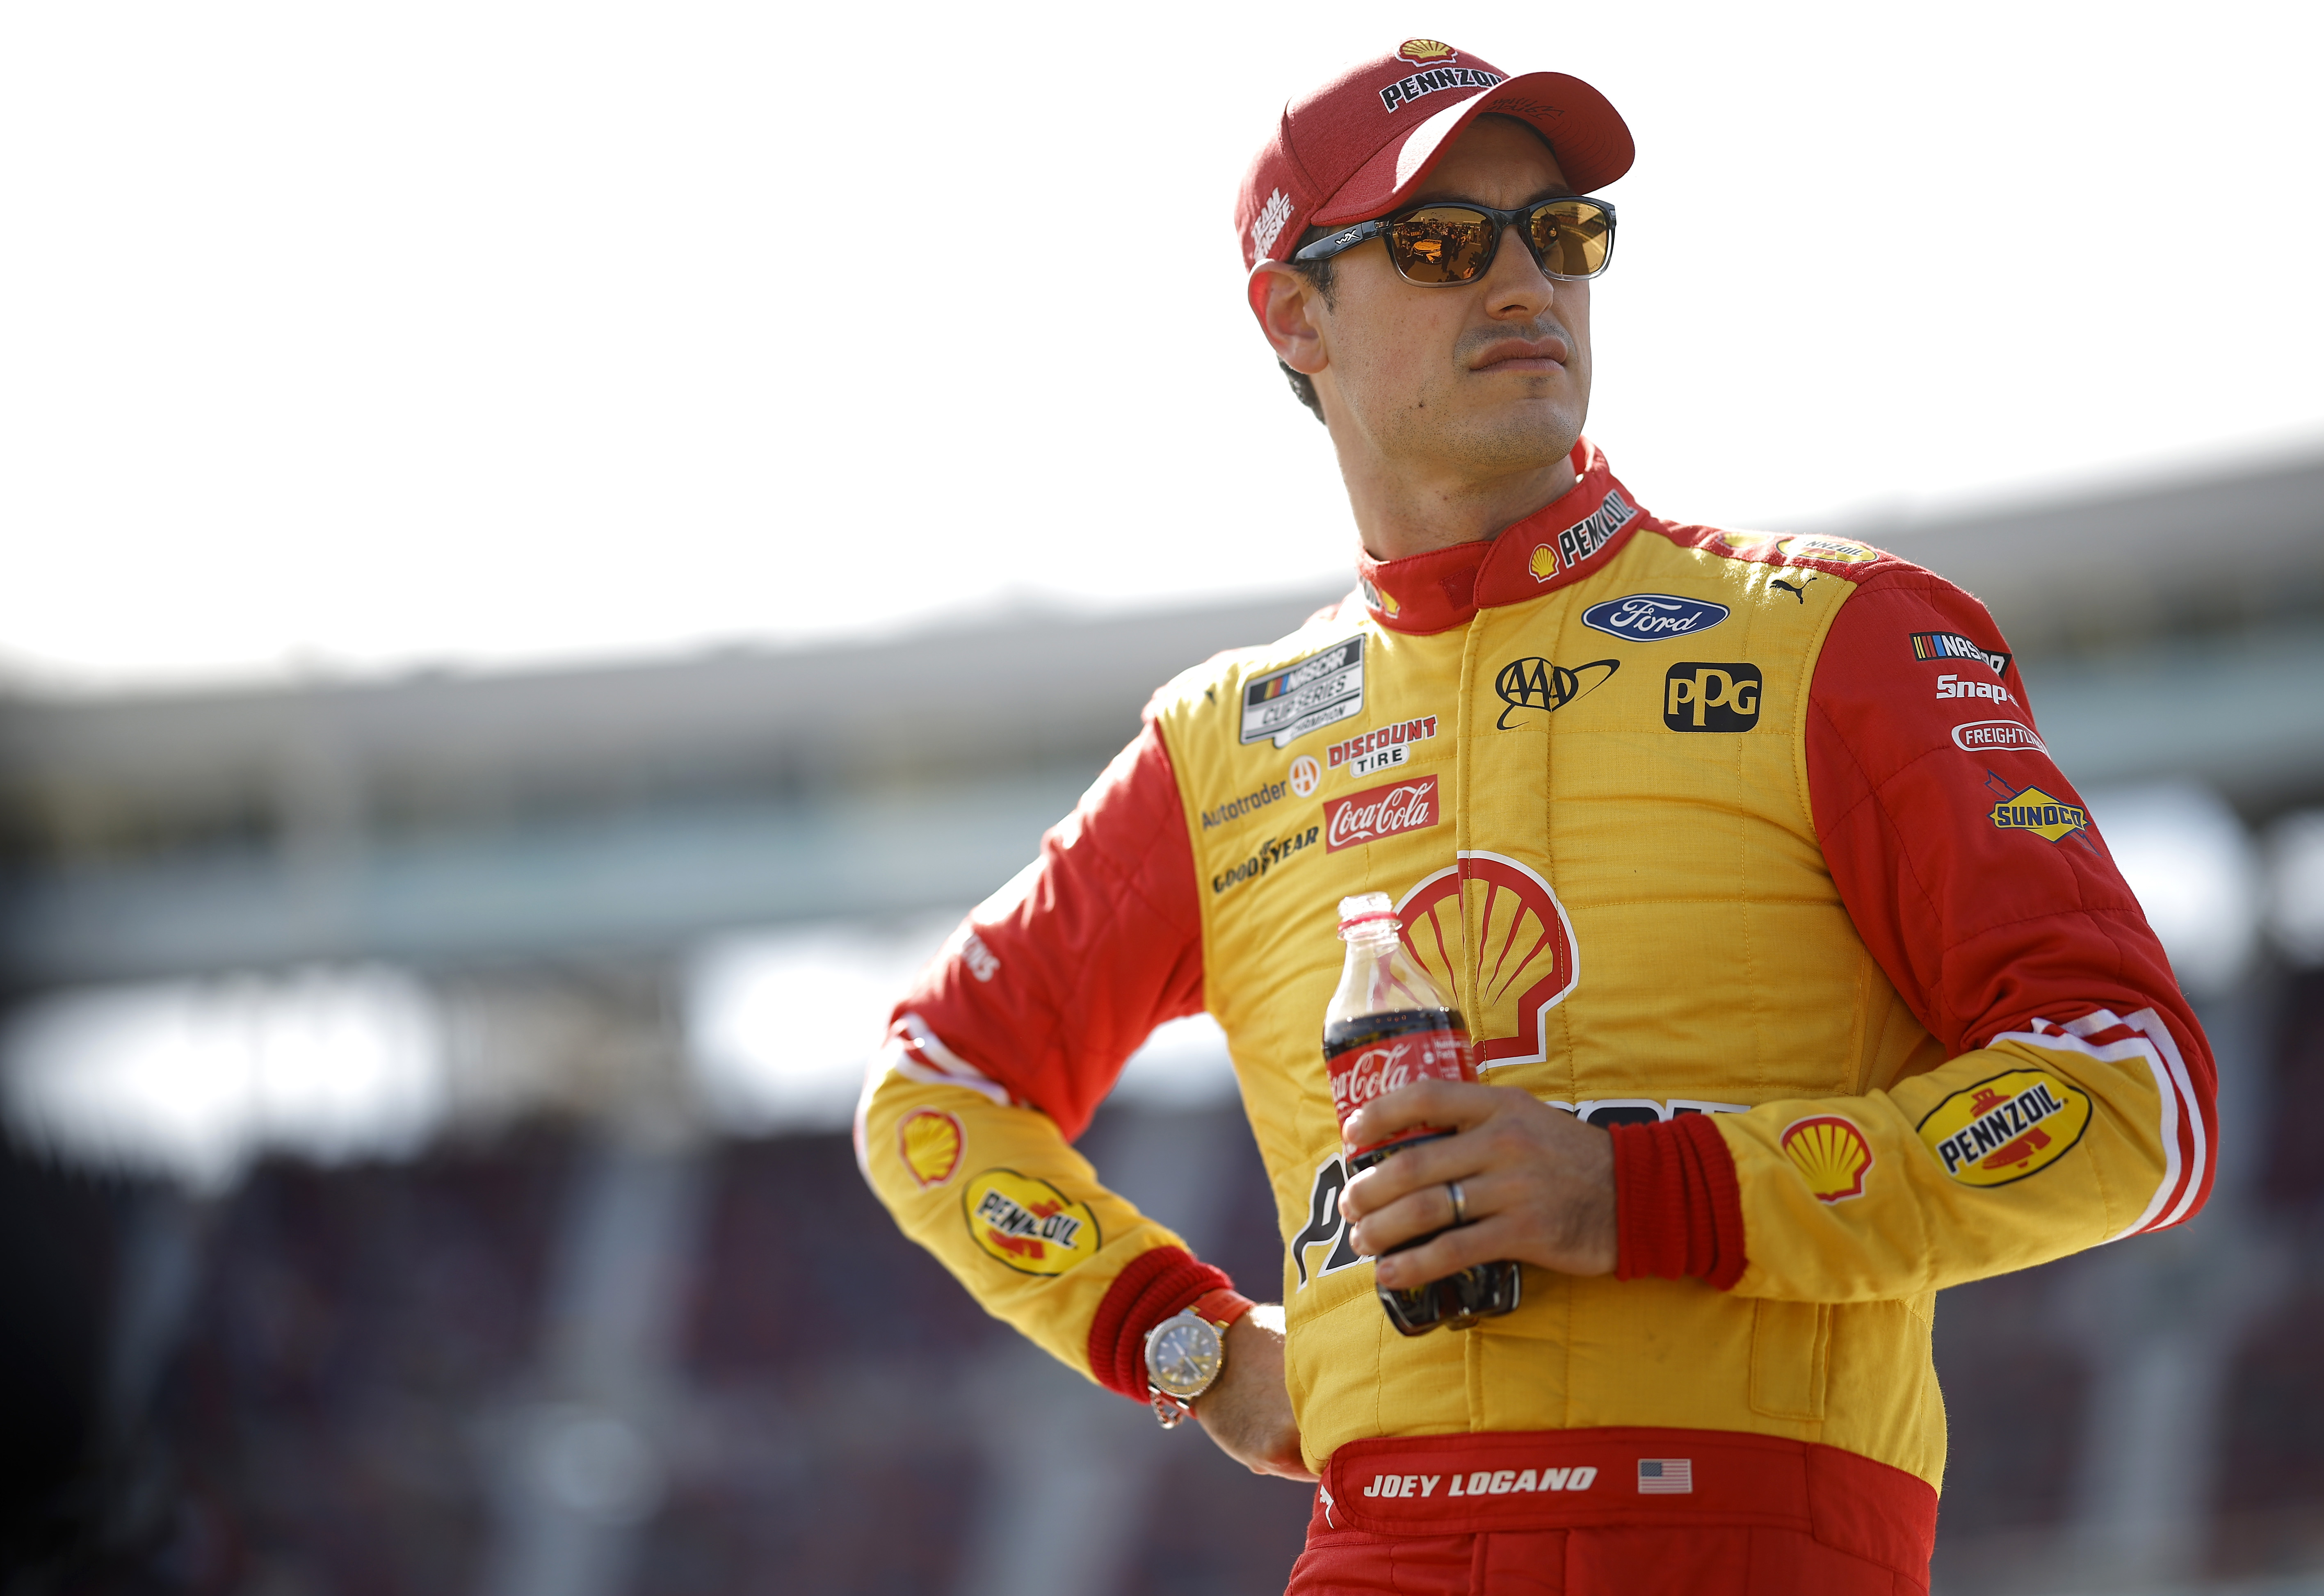 Joey Logano, driver of the #22 Shell Pennzoil Ford, waits on the grid during qualifying for the NASCAR Cup Series Championship at Phoenix Raceway on November 05, 2022 in Avondale, Arizona.